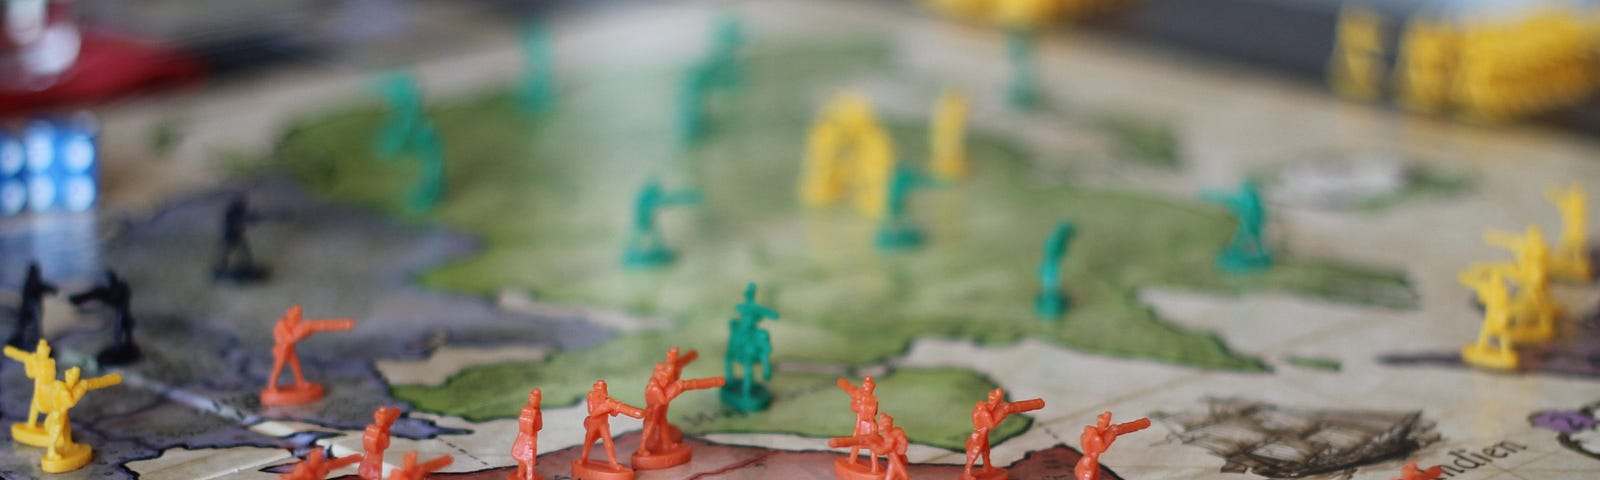 A photo of the board game Risk mid play